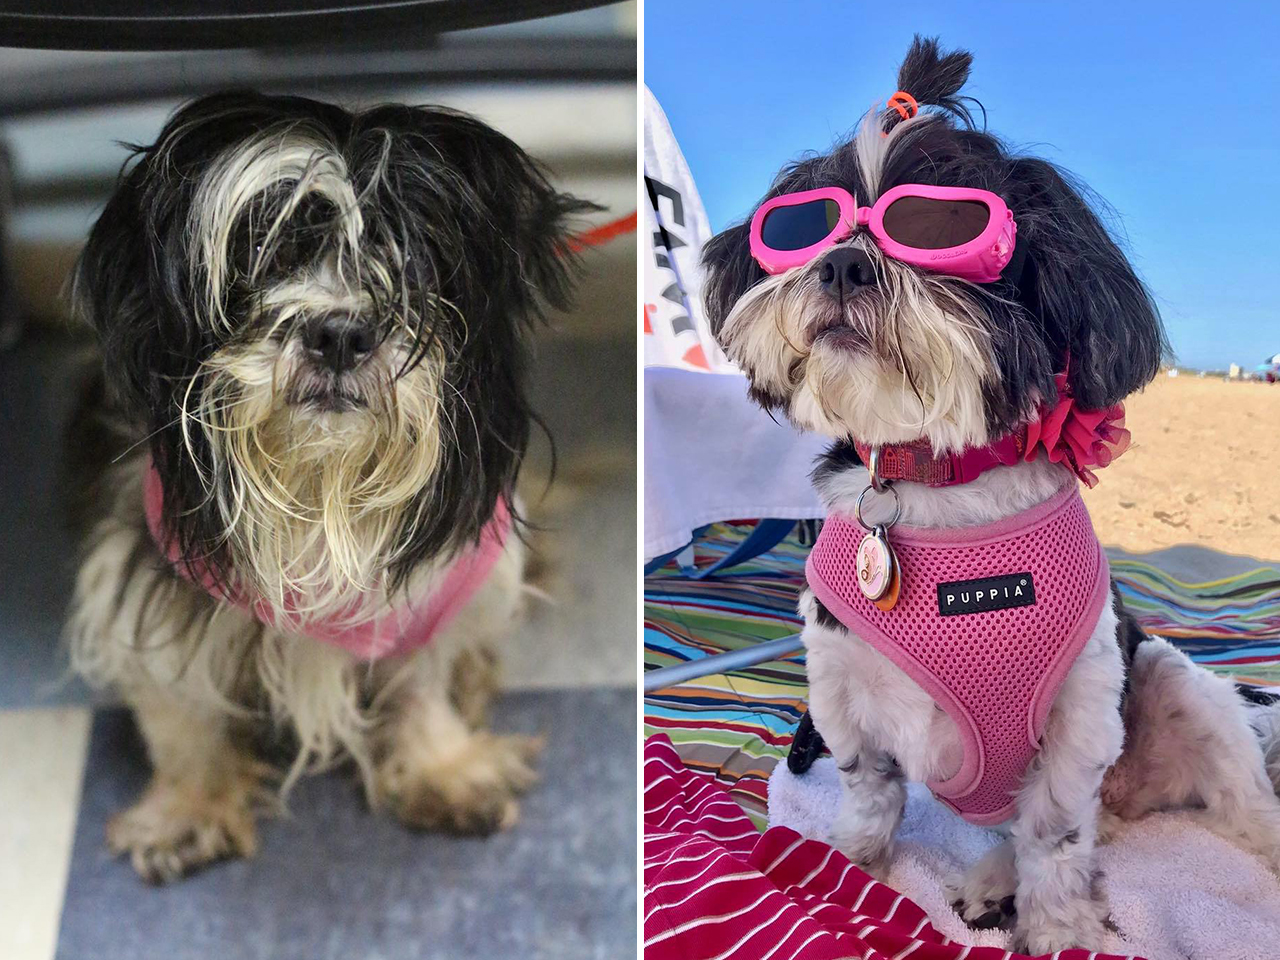 Lucy was underweight and covered in matted fur. After being rescued and groomed, she flourished. Lucy finally found her happily ever after in a loving home, and she spreads joy wherever she goes.